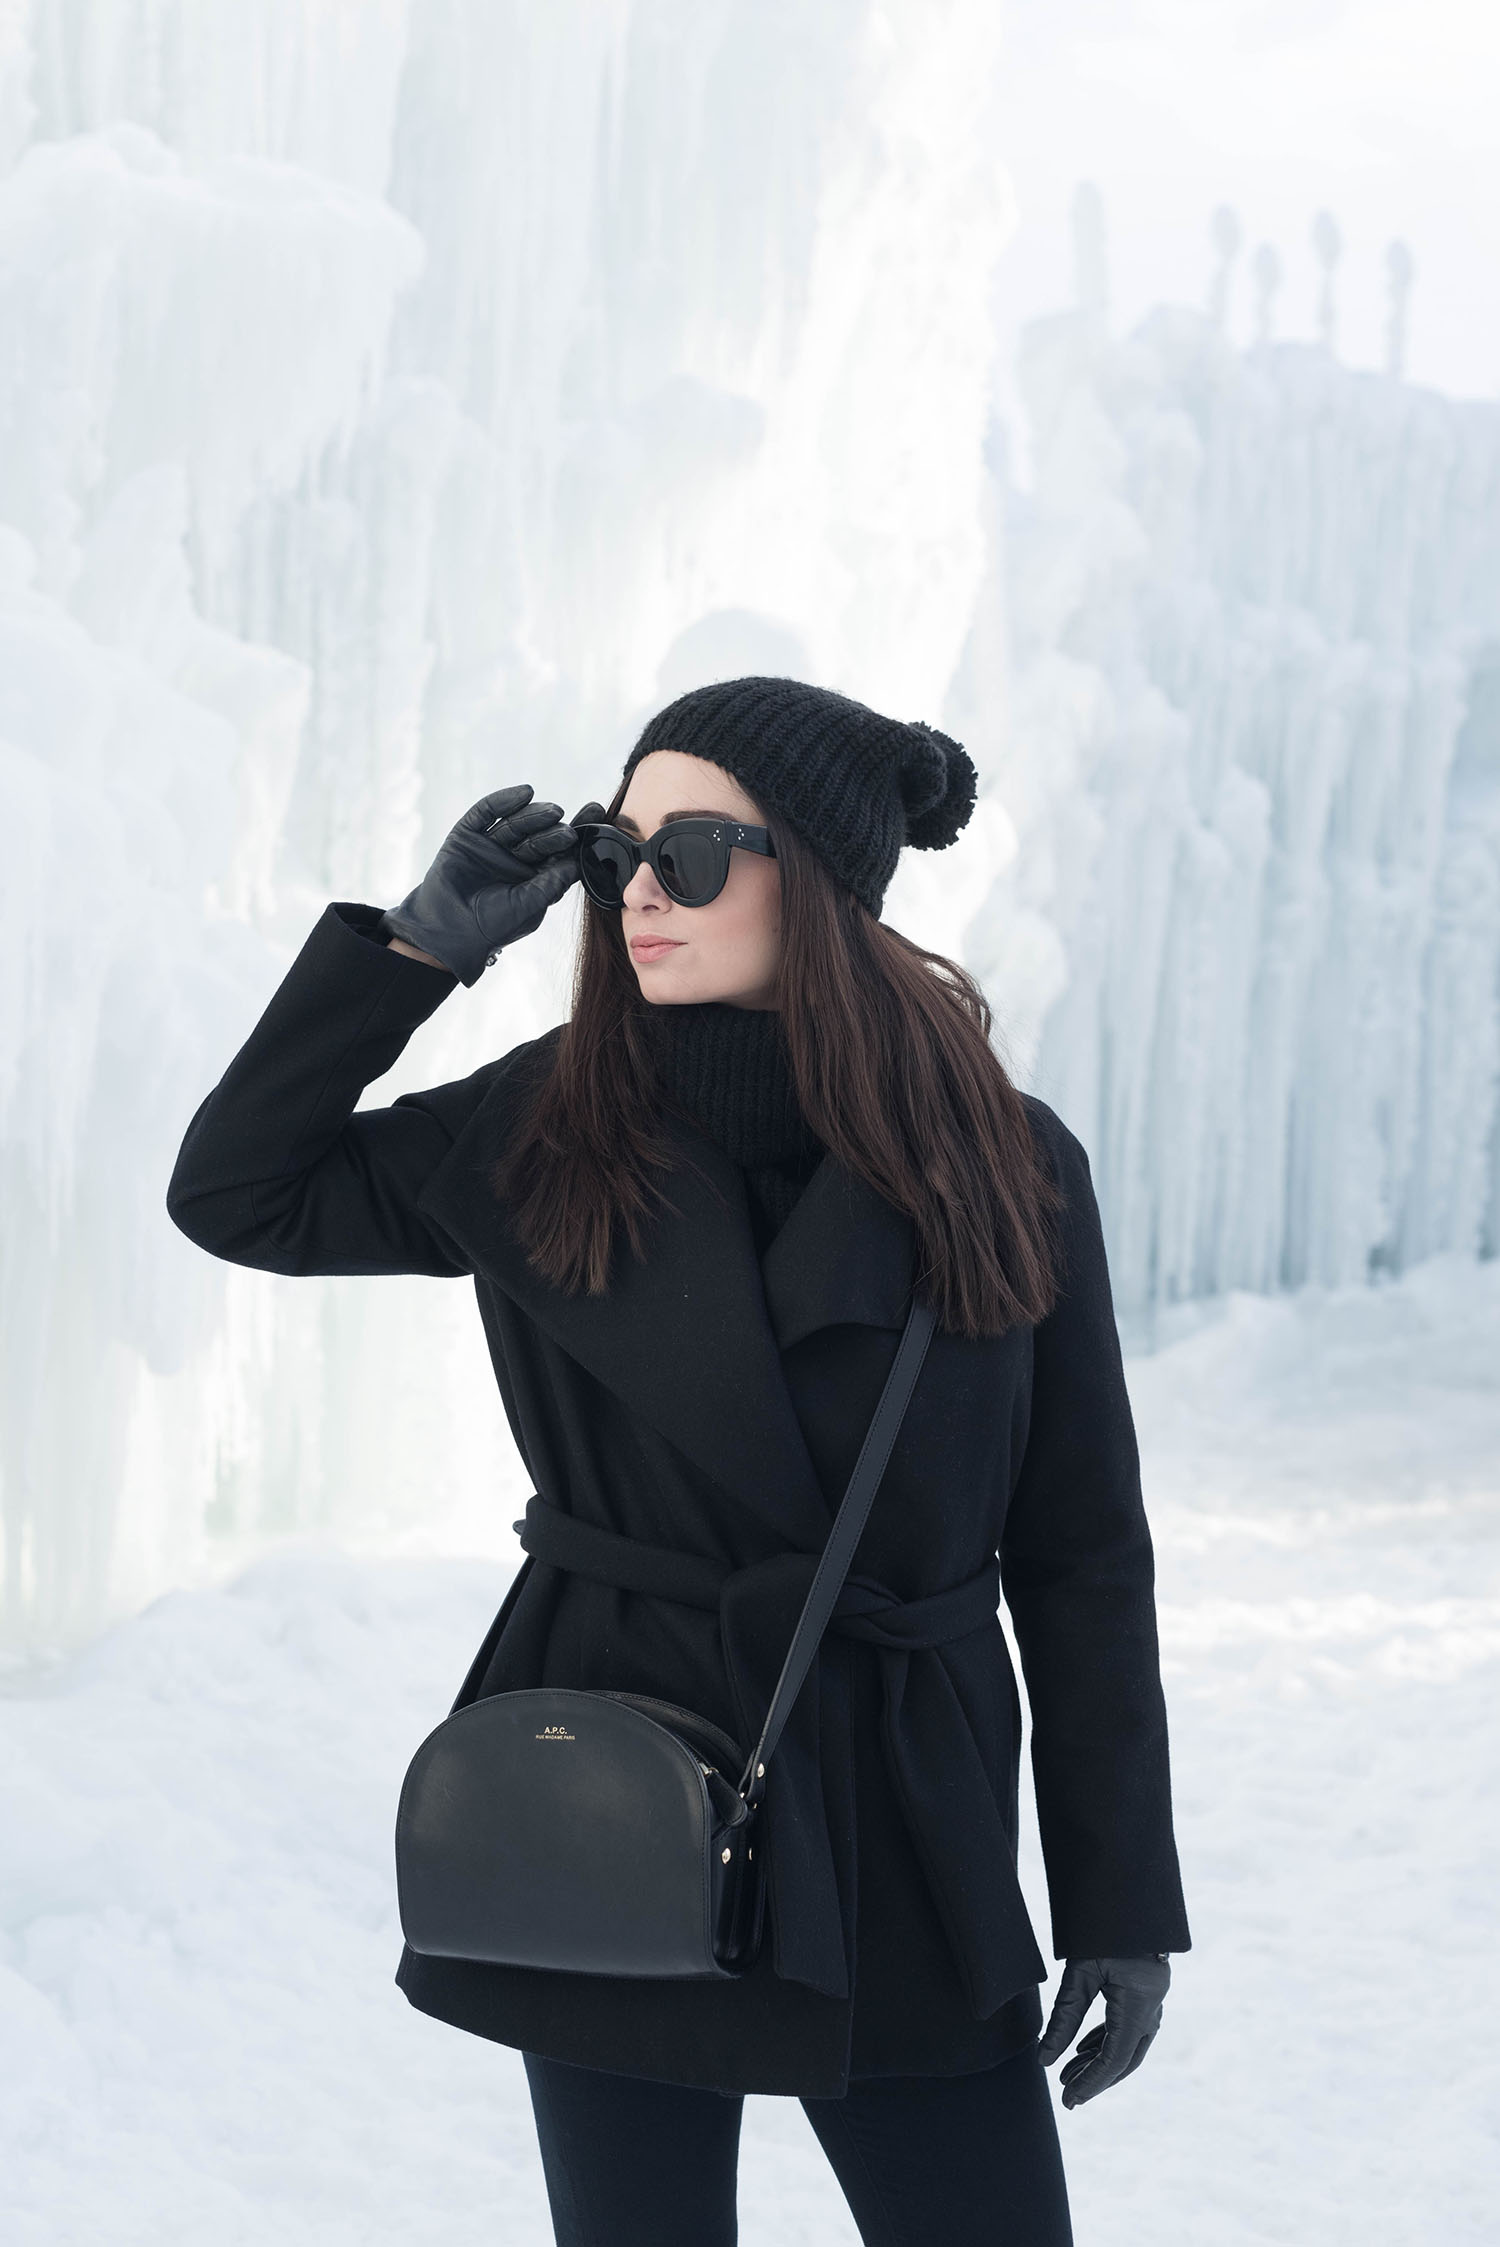 Portrait of Canadian fashion blogger Cee Fardoe at Ice Castles at the Forks in Winnipeg, wearing Celine Audrey sunglasses and a Mavi pompom hat